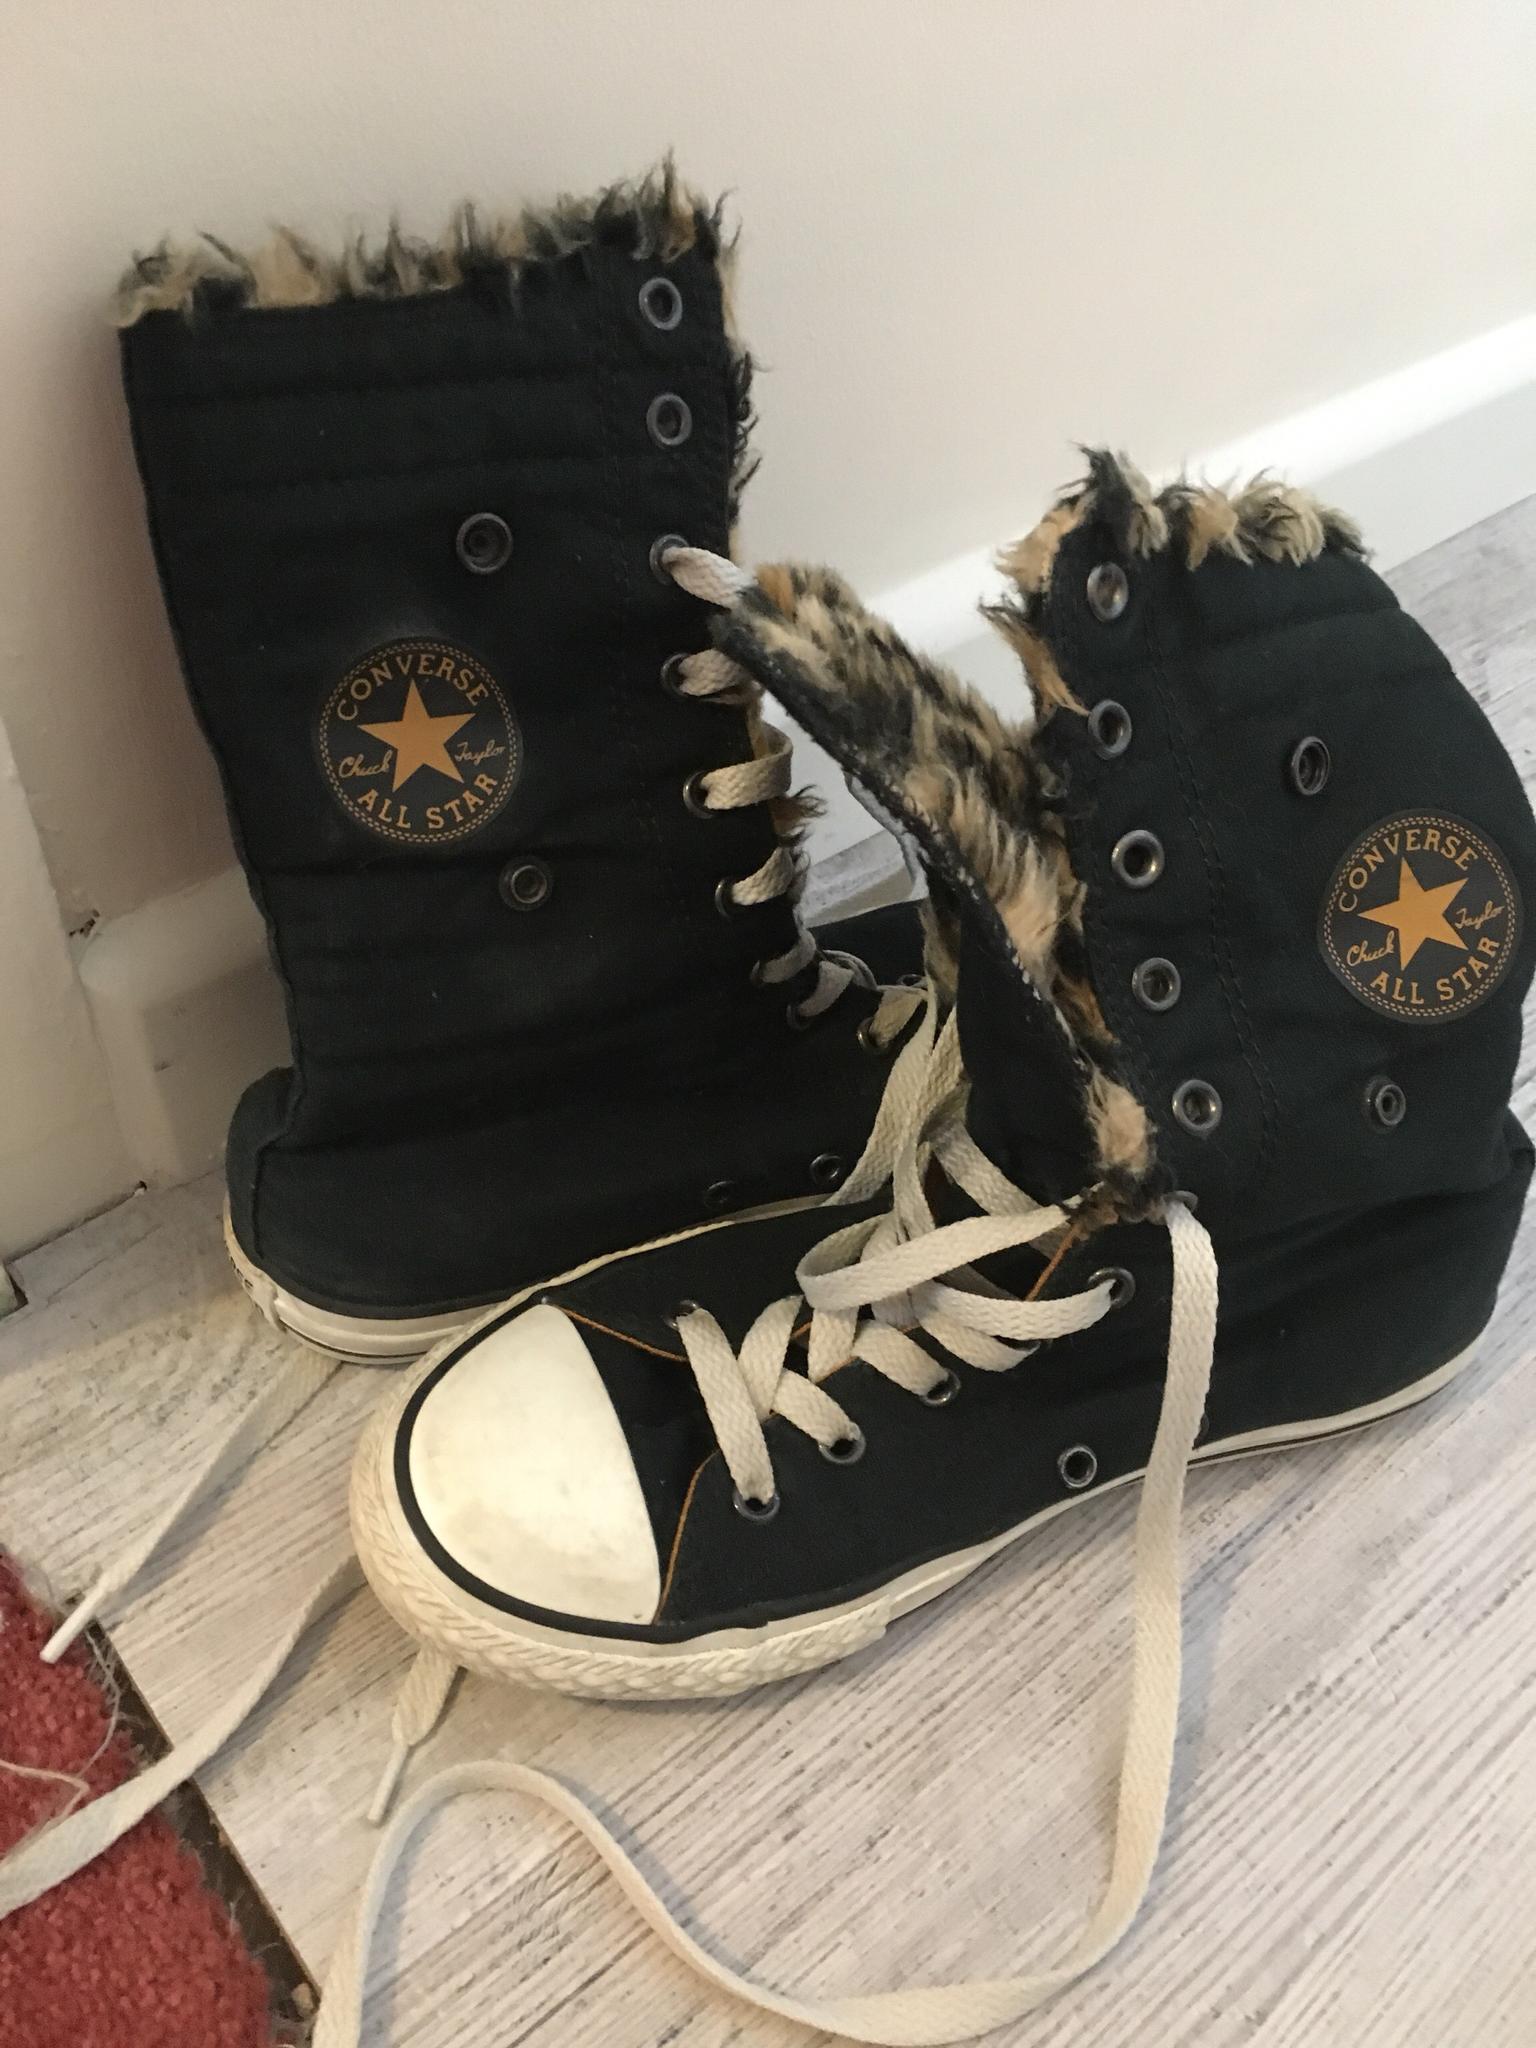 converse with fur lining